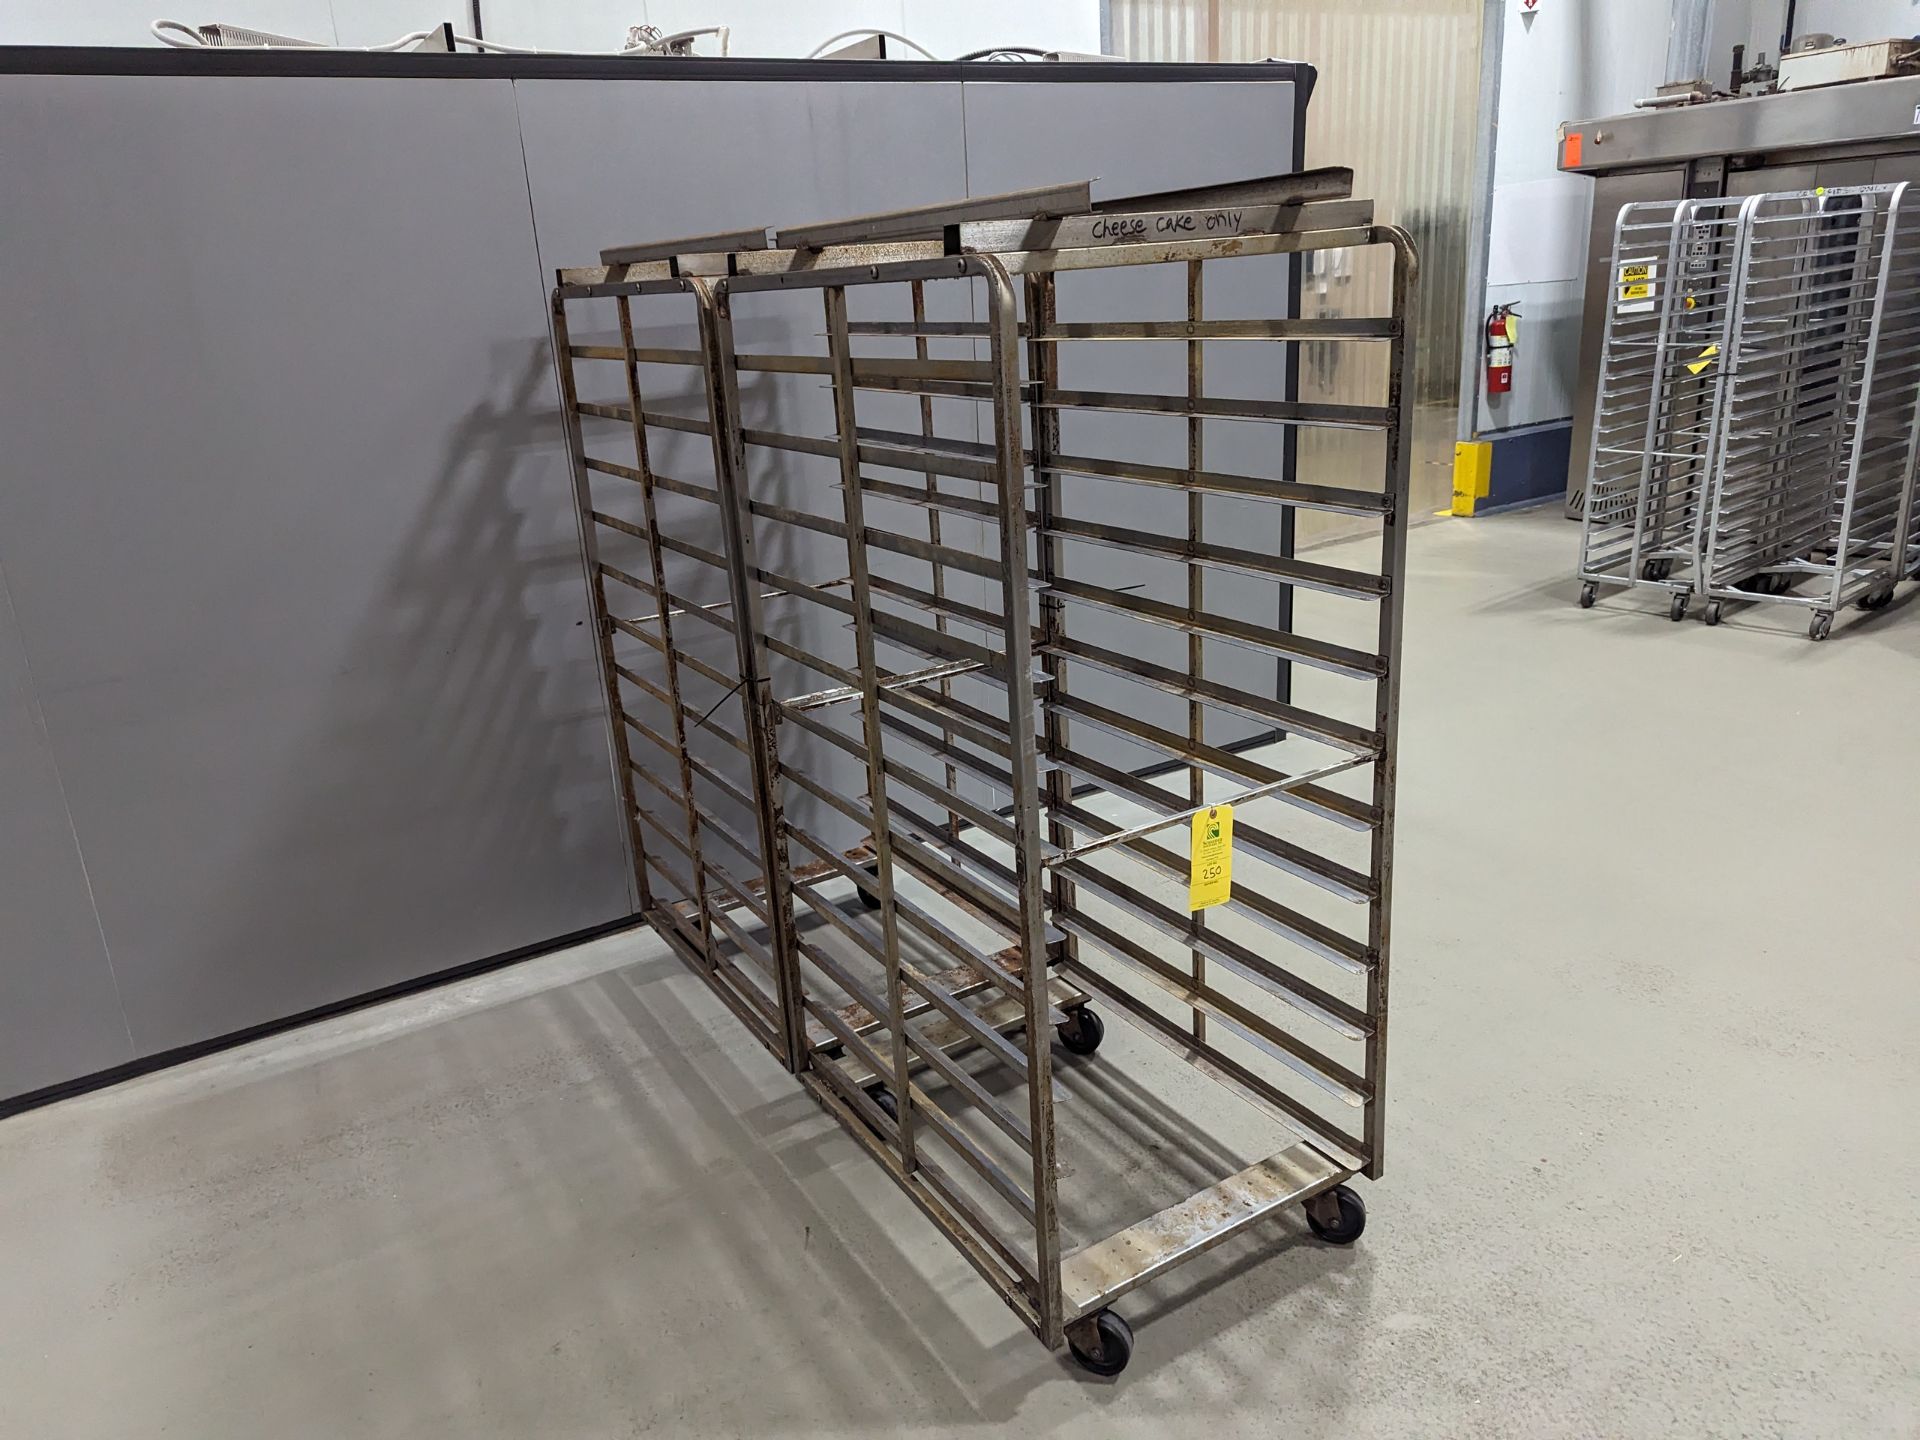 Lot of 2 Double Wide Stainless Steel Bakery Racks, Dimensions LxWxH: 72x28x69 Measurements are for - Image 3 of 6